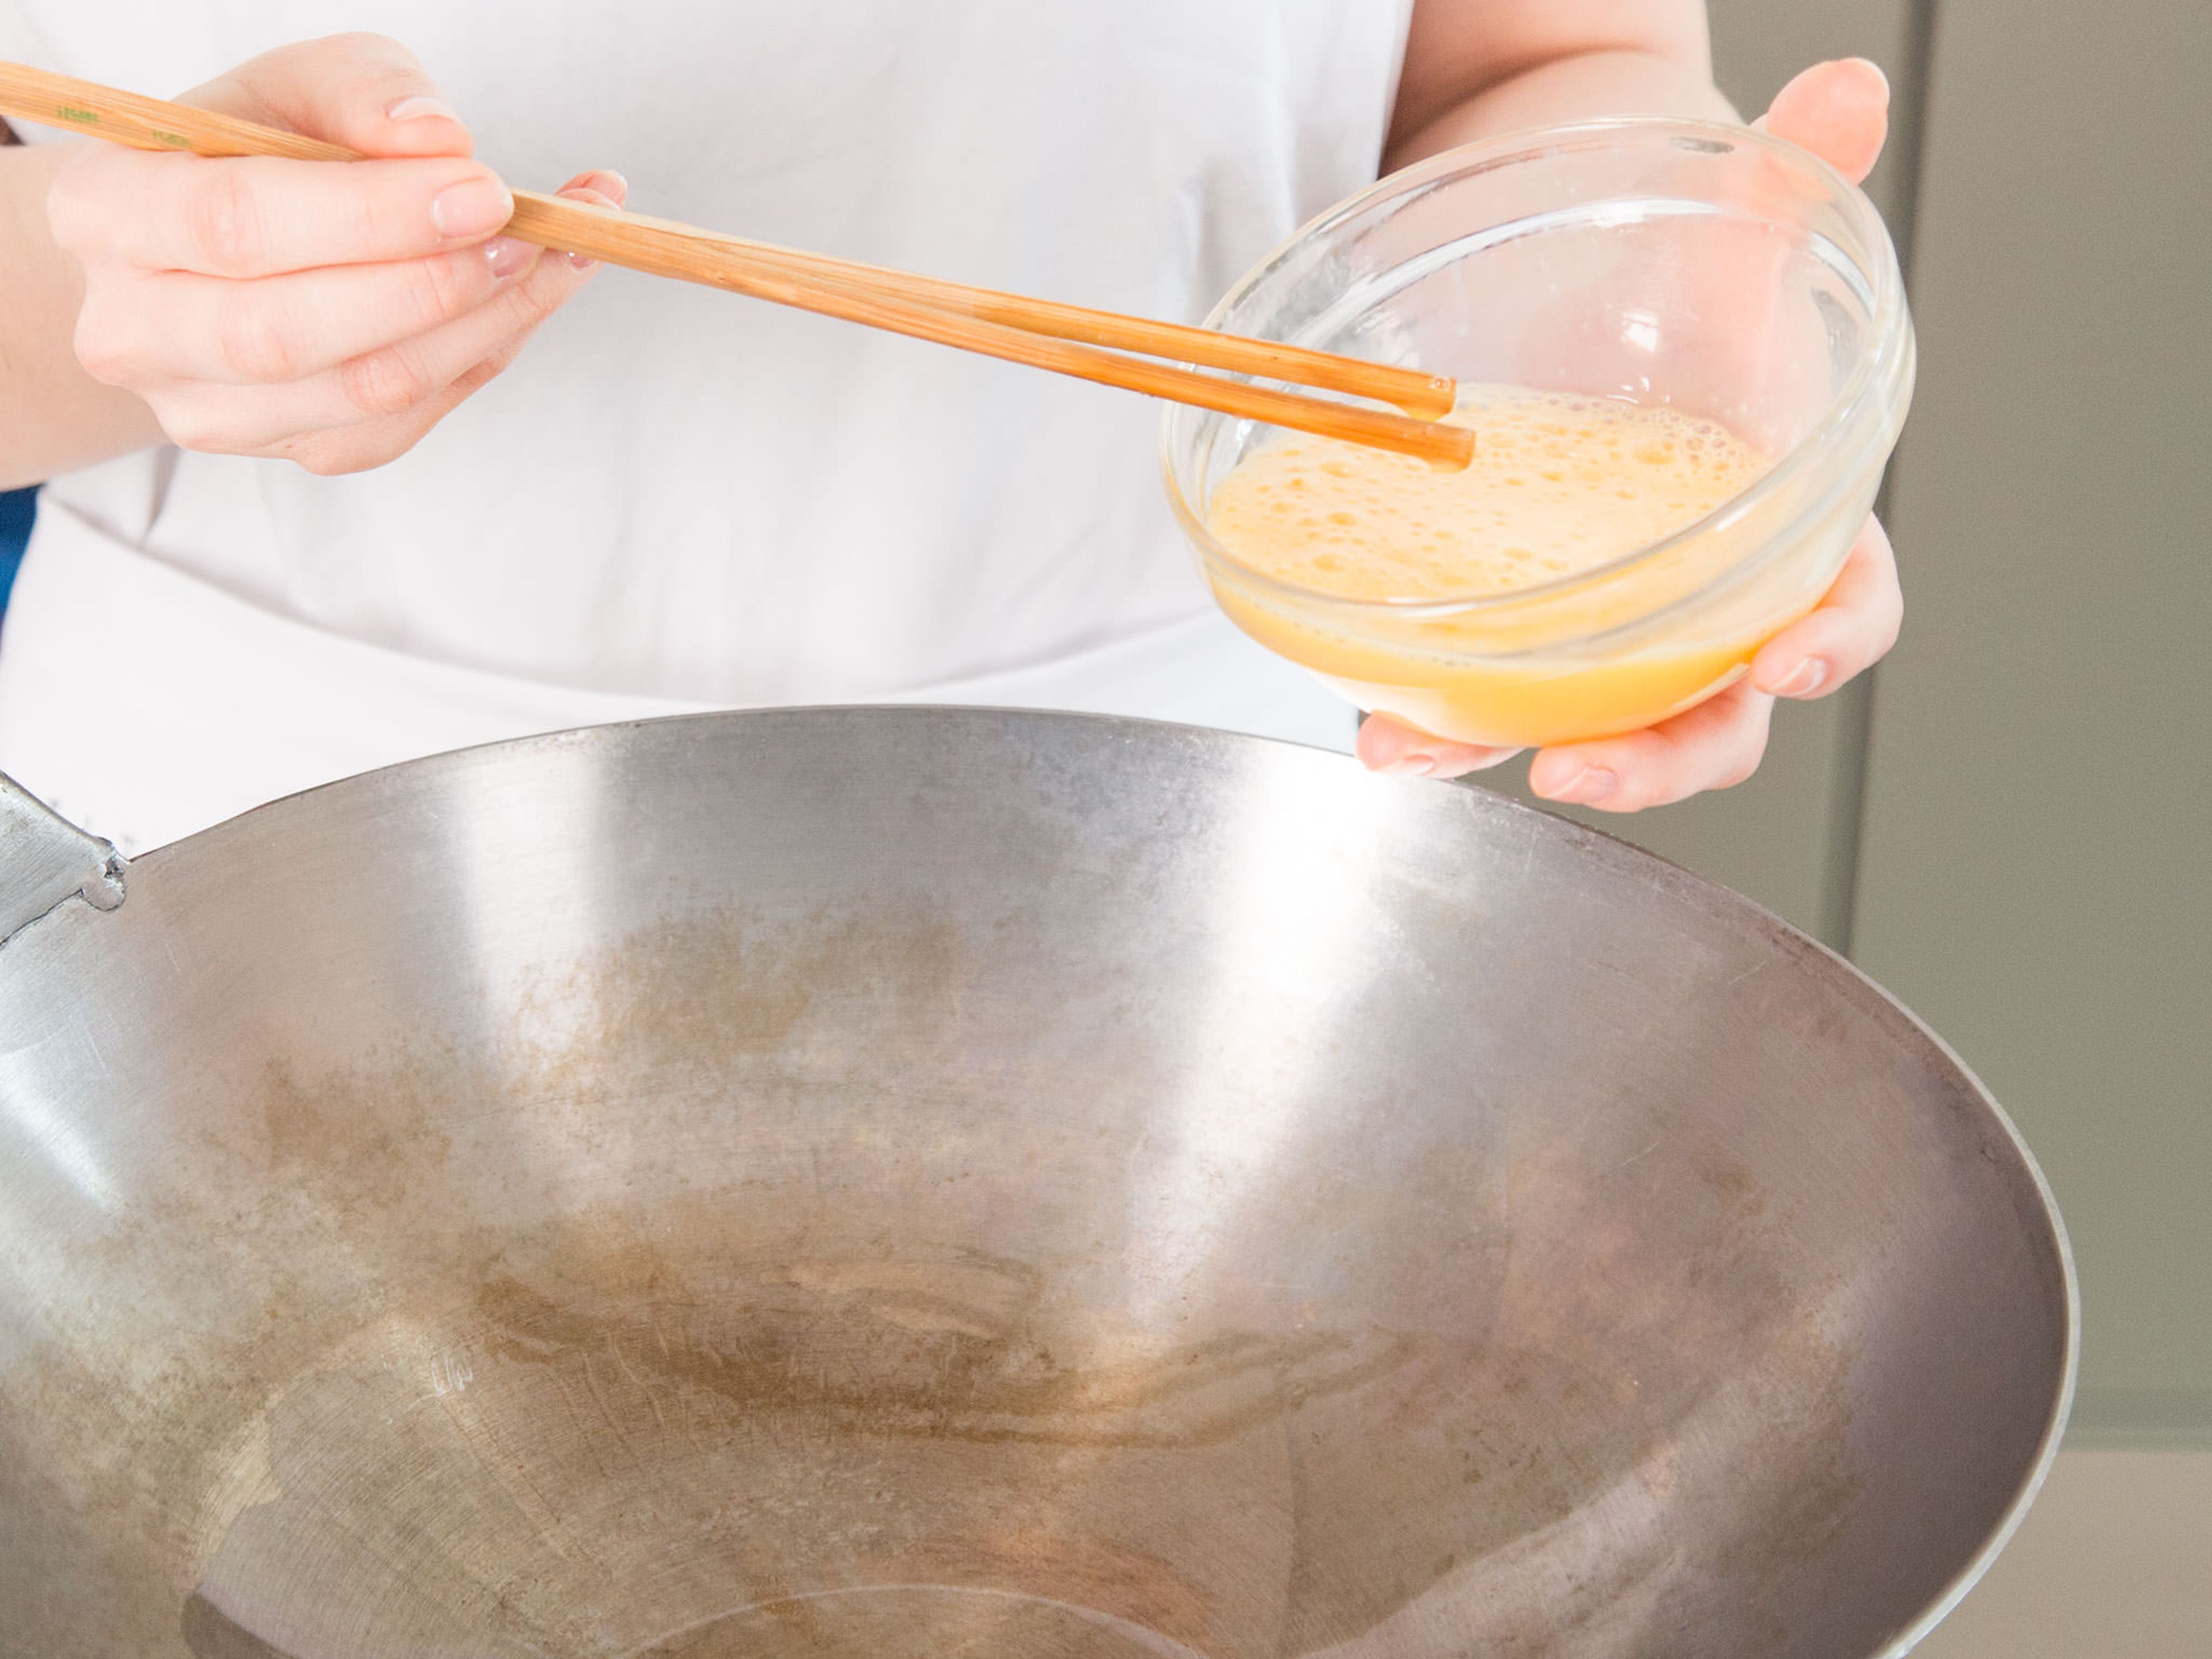 Add a little oil to the wok and scramble the eggs over medium heat.